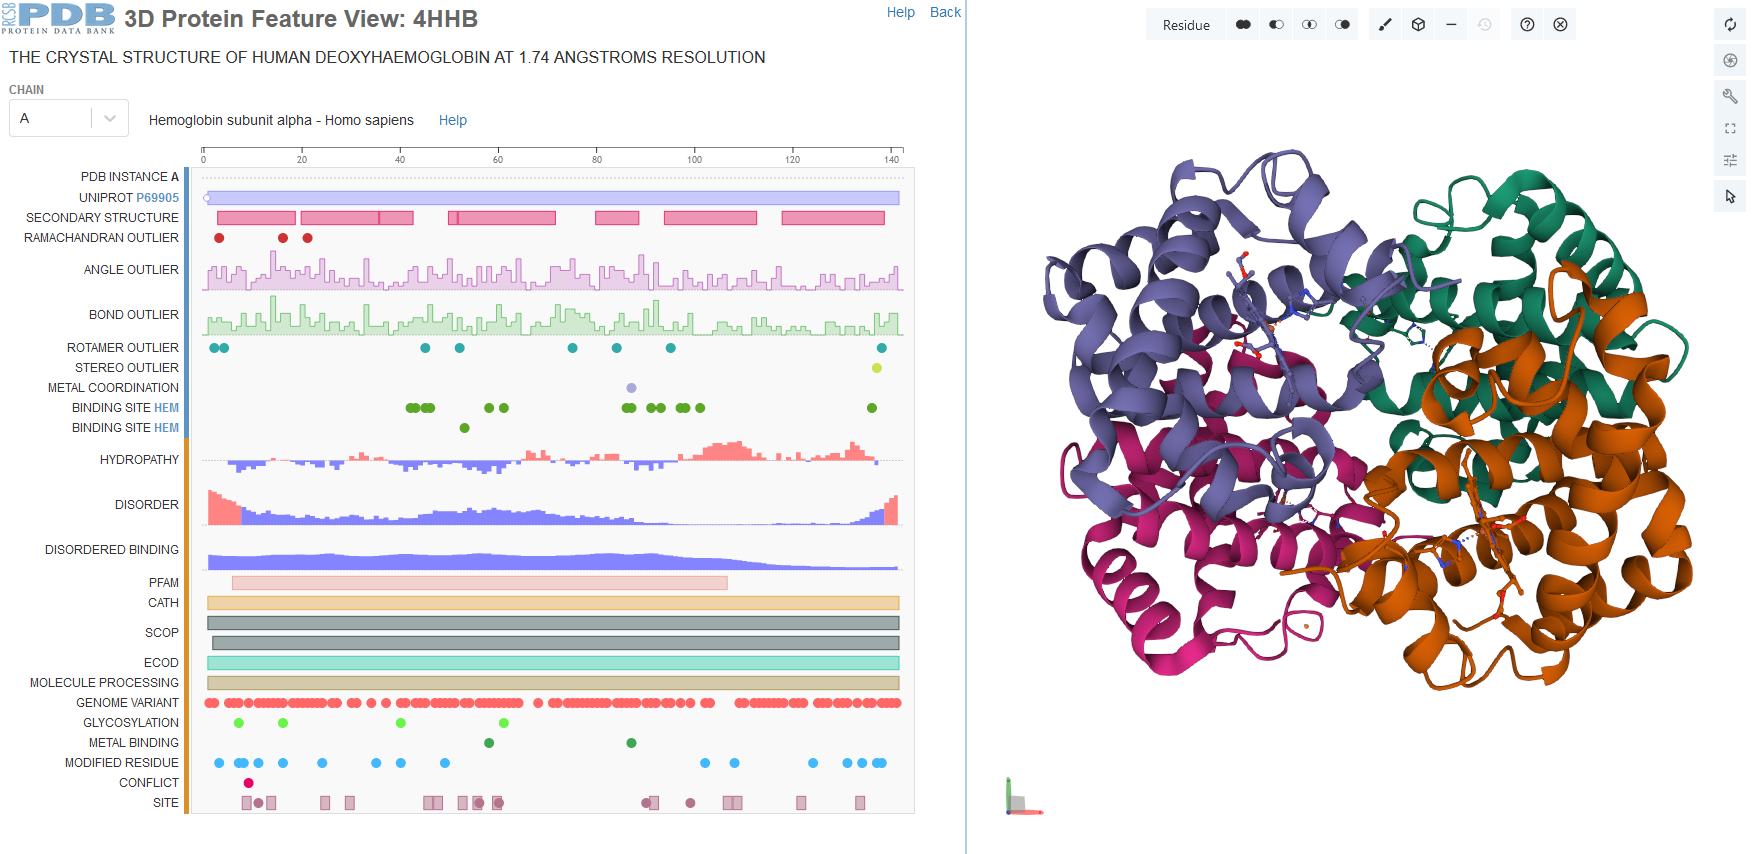 RCSB 3D Protein Feature View